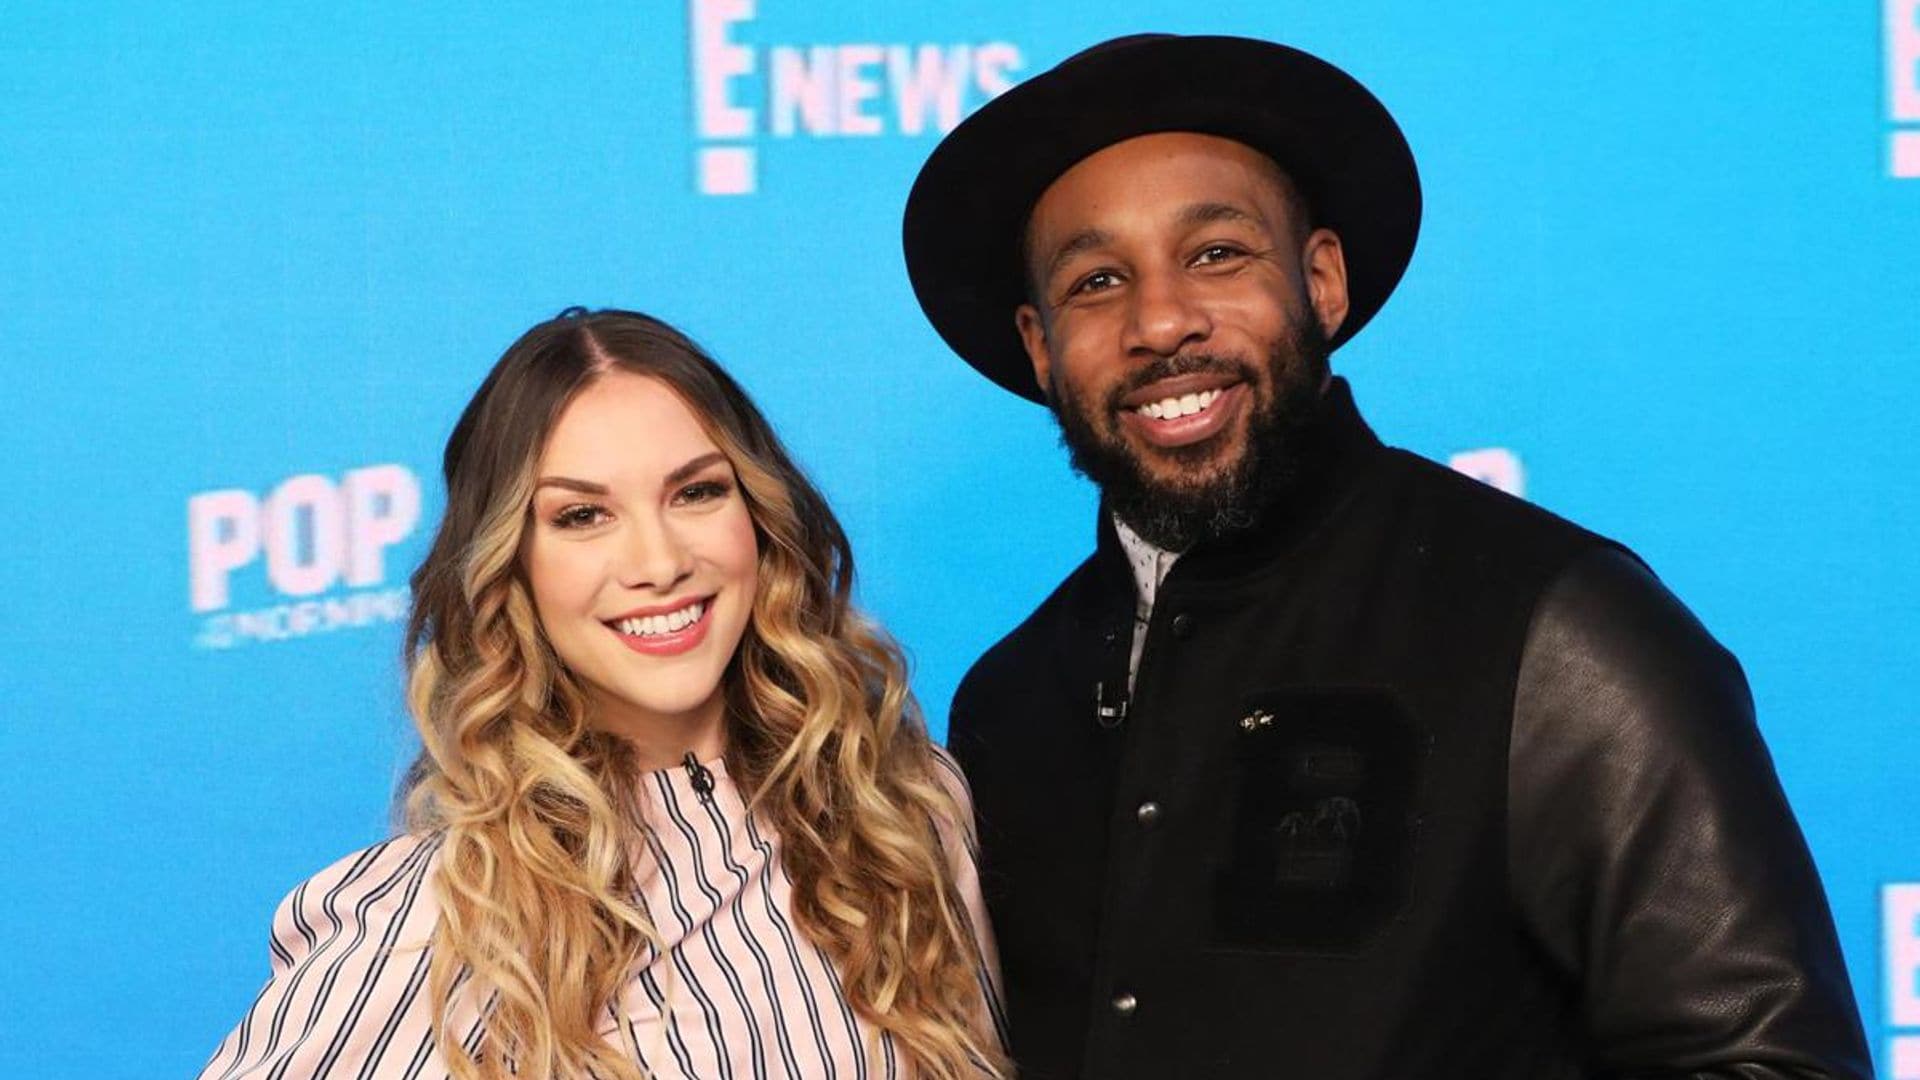 Allison Holker reveals if she is open to dating after the death Stephen ‘tWitch’ Boss